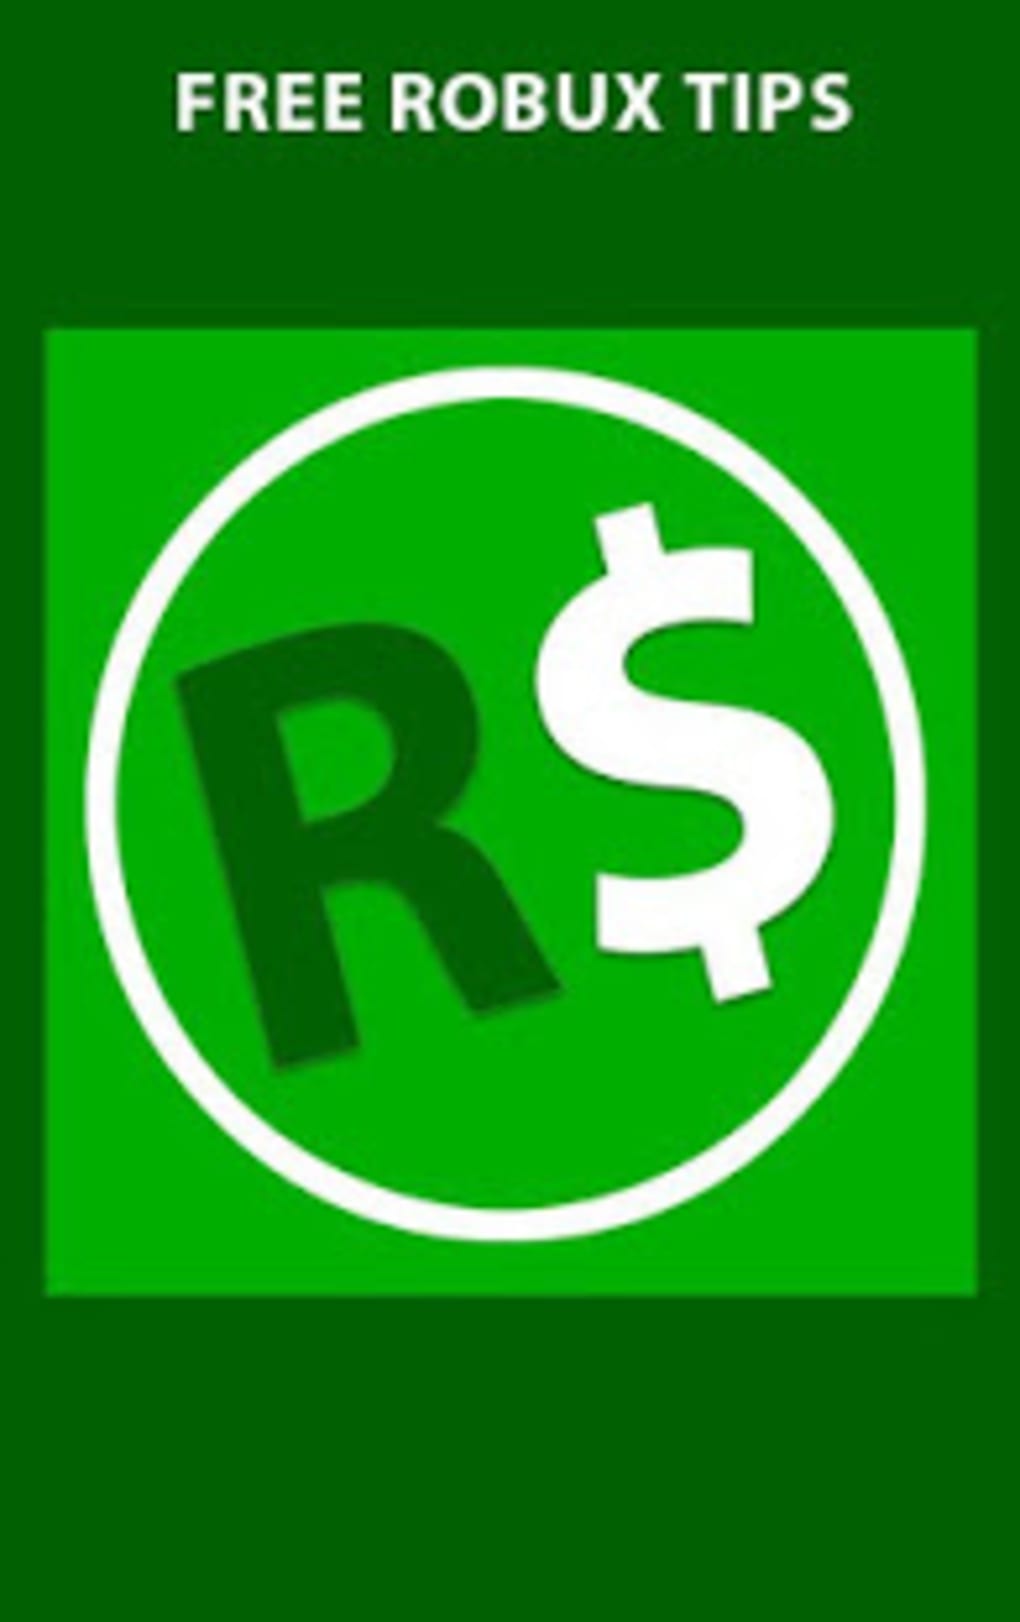 Free Robux Lucky Patcher - how to get free robux android